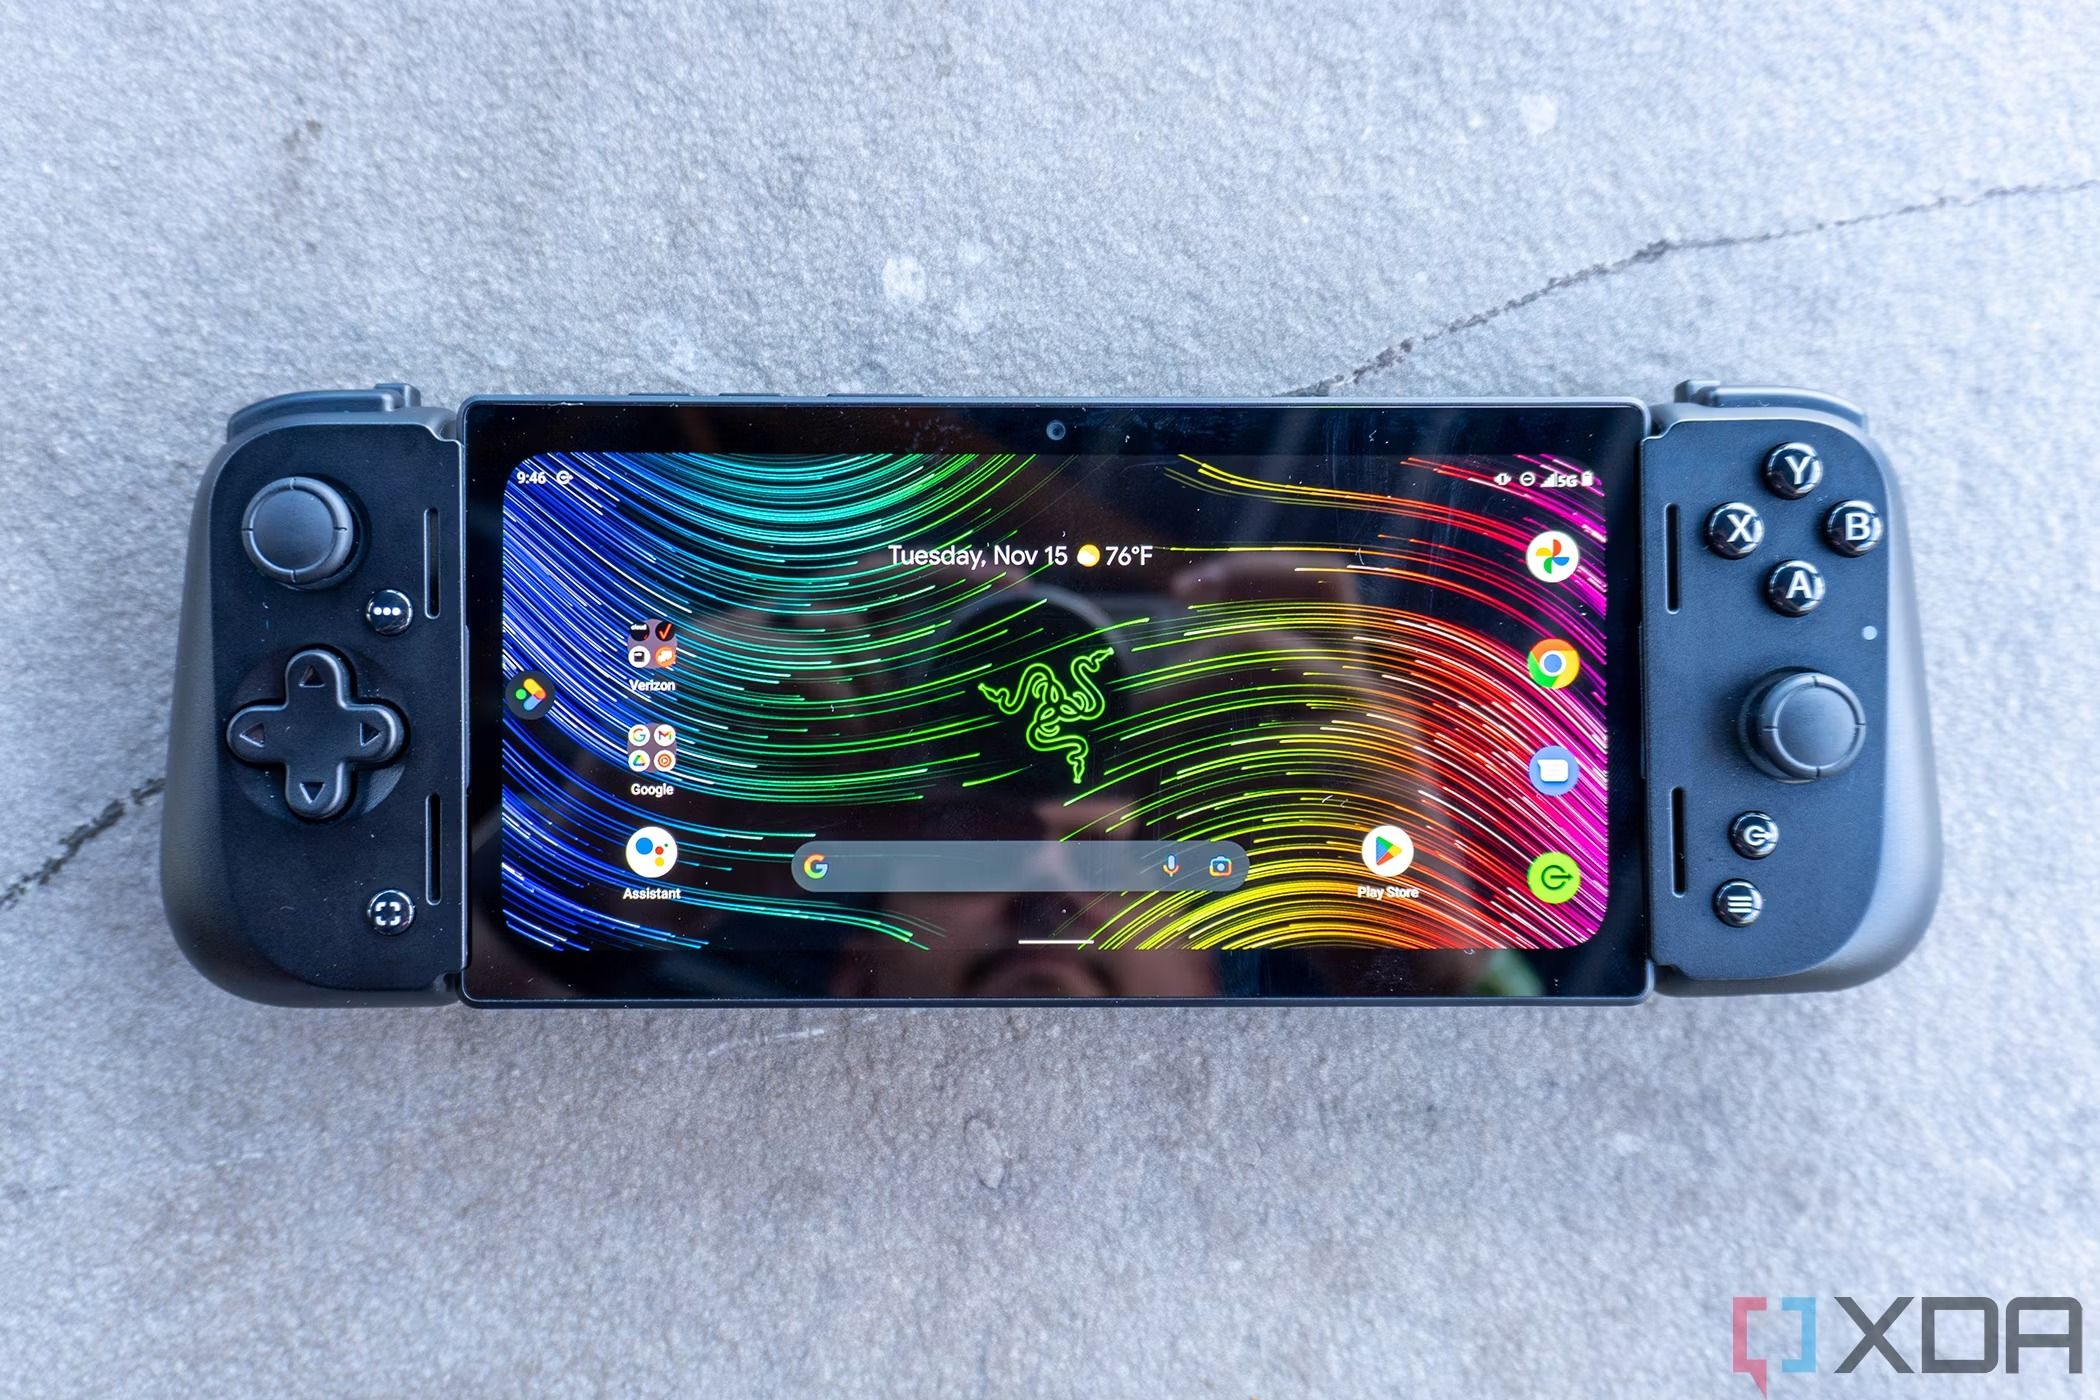 Photos: First look at the Razer Edge 5G, a new Steam Deck competitor